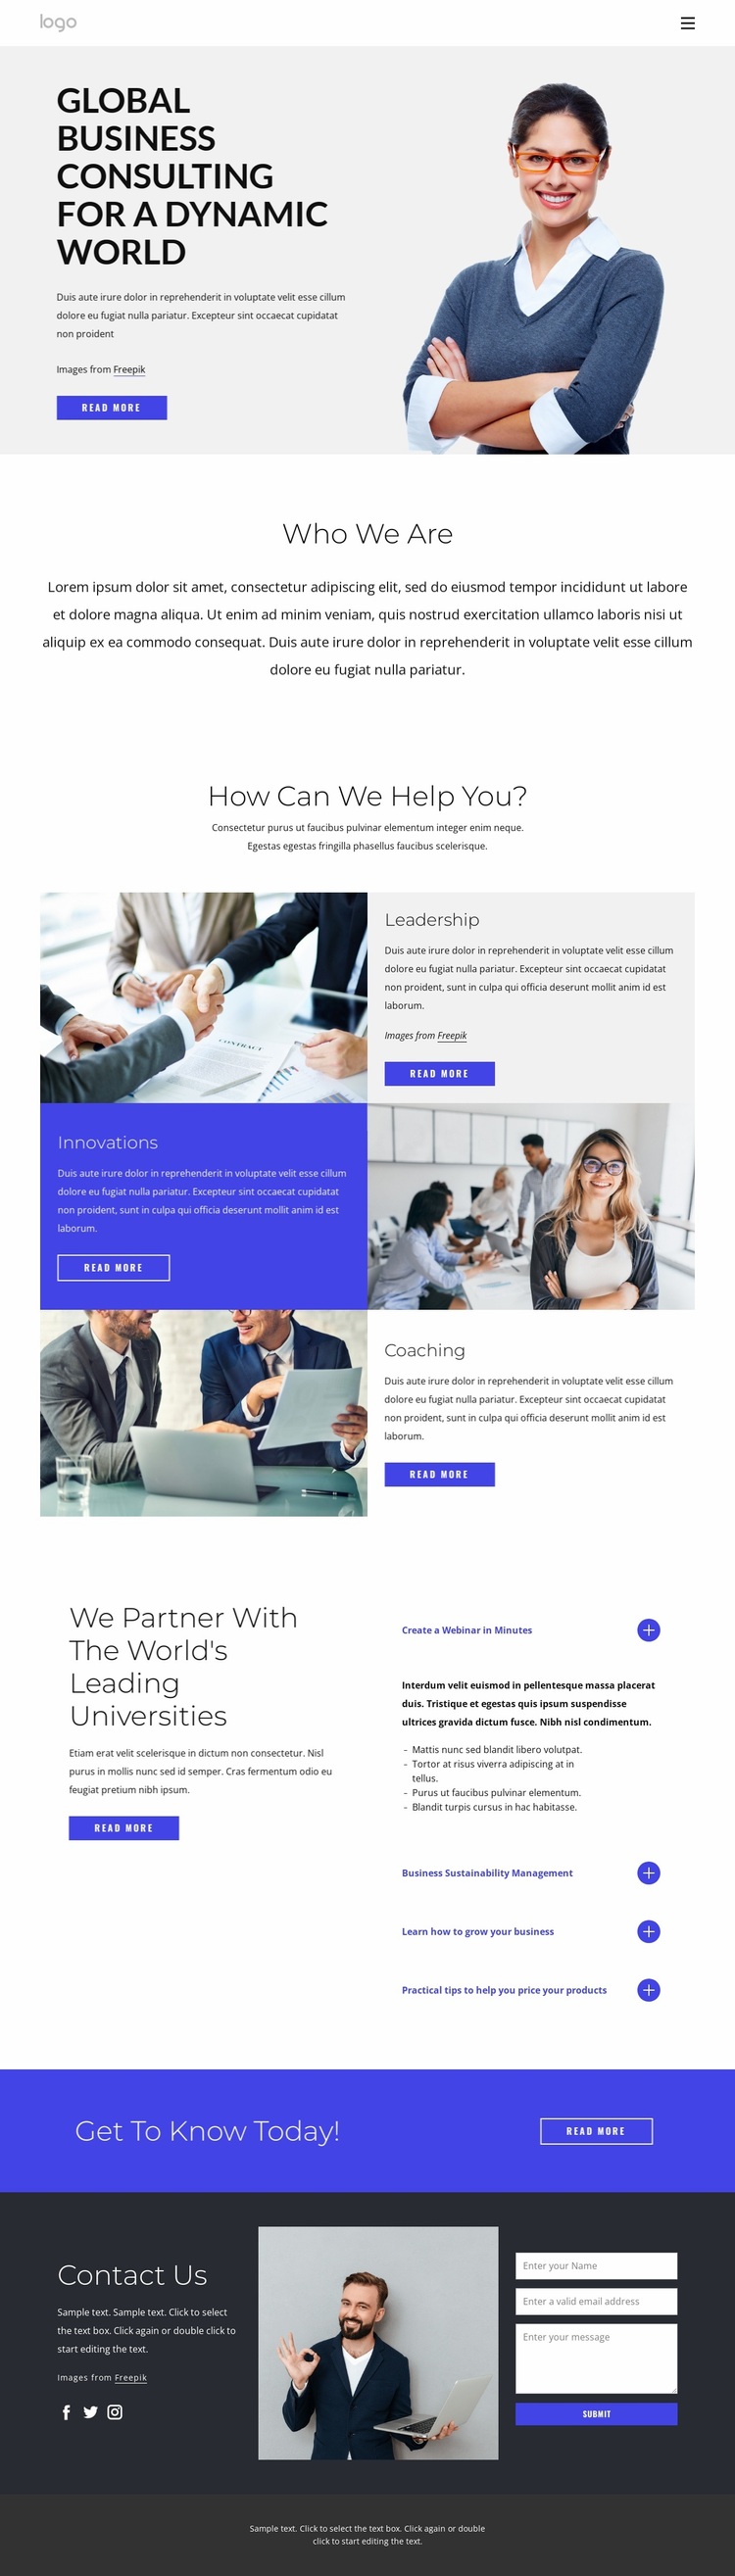 Global business consulting Website Design